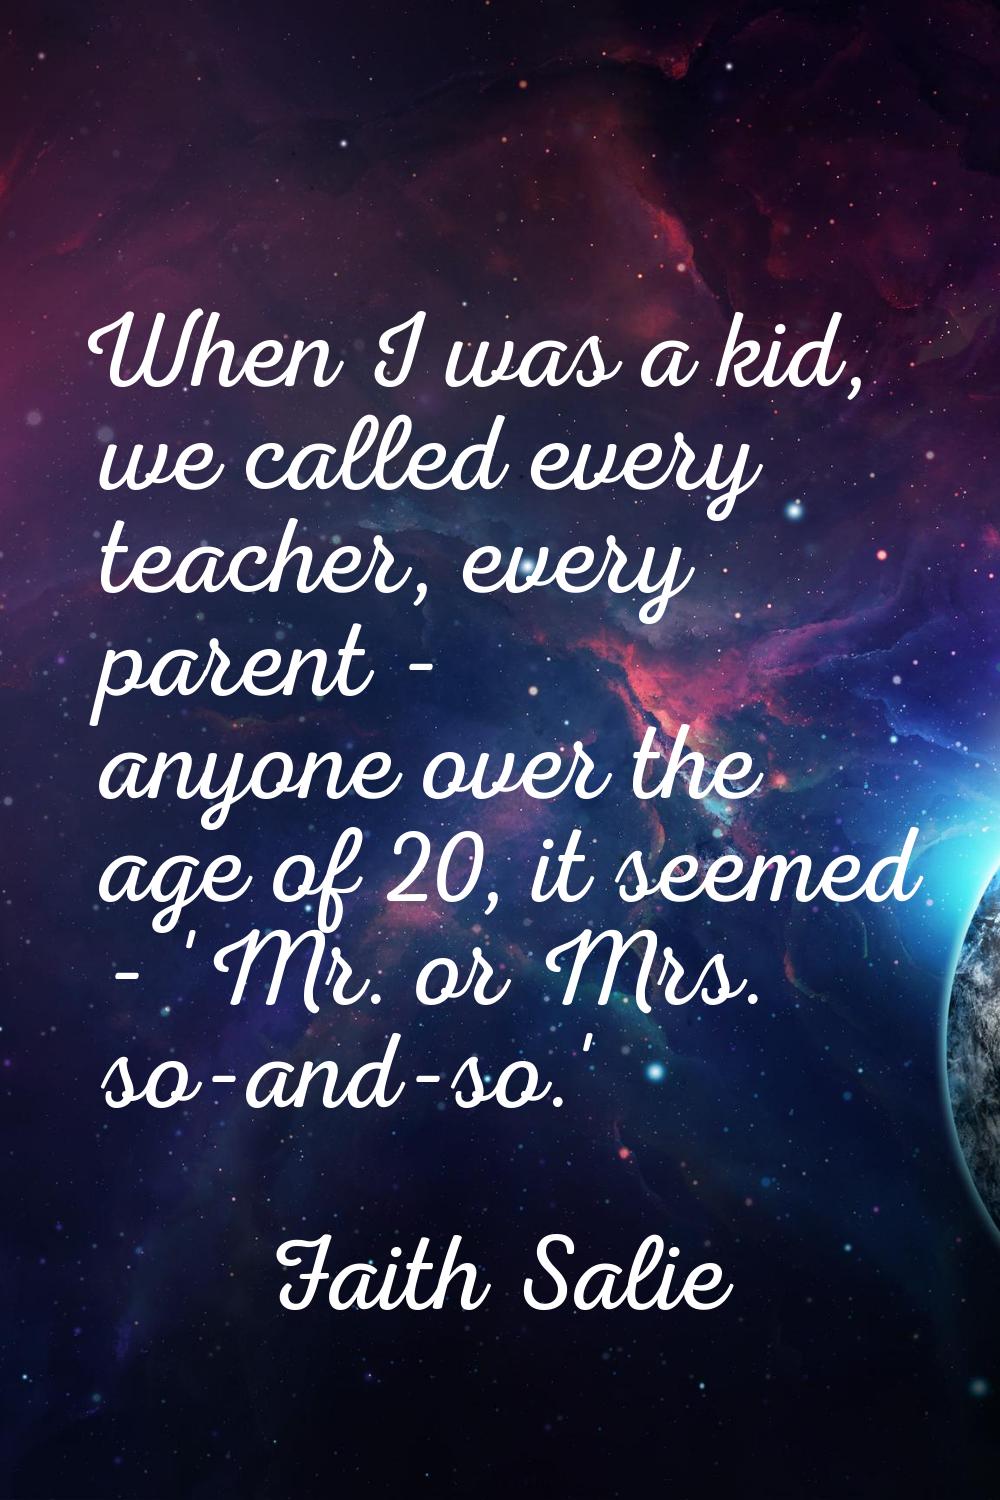 When I was a kid, we called every teacher, every parent - anyone over the age of 20, it seemed - 'M